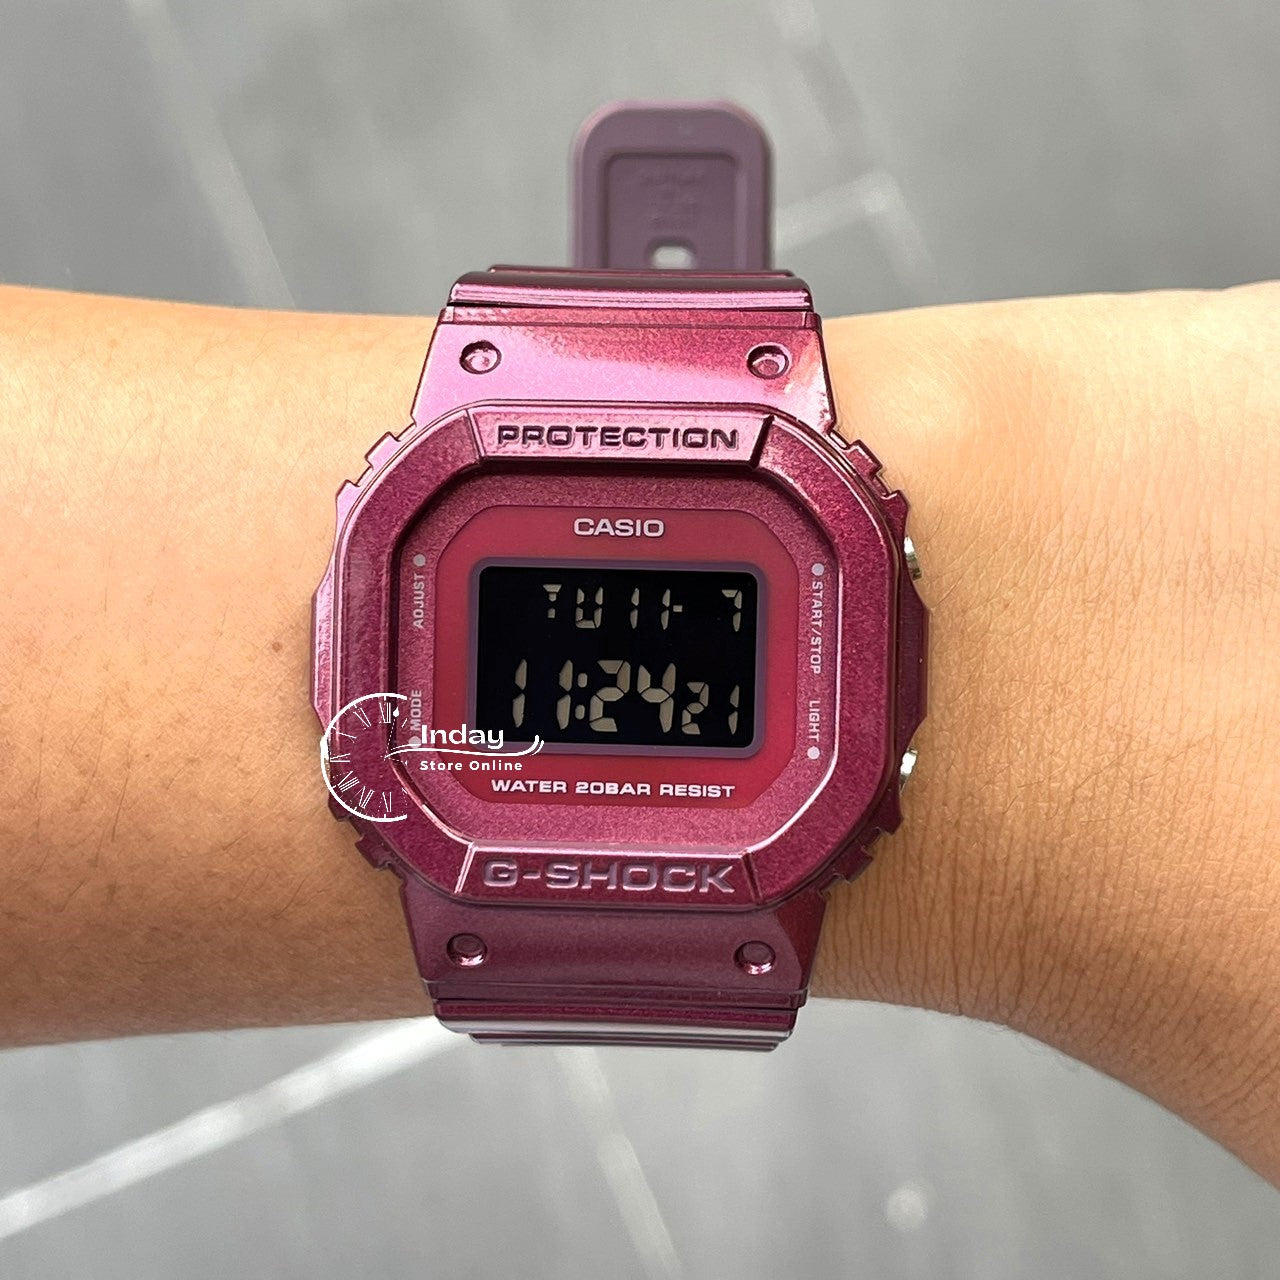 Casio G-Shock Women's Watch GMD-S5600RB-4 Digital New Arrival Shock Resistant Resin Band